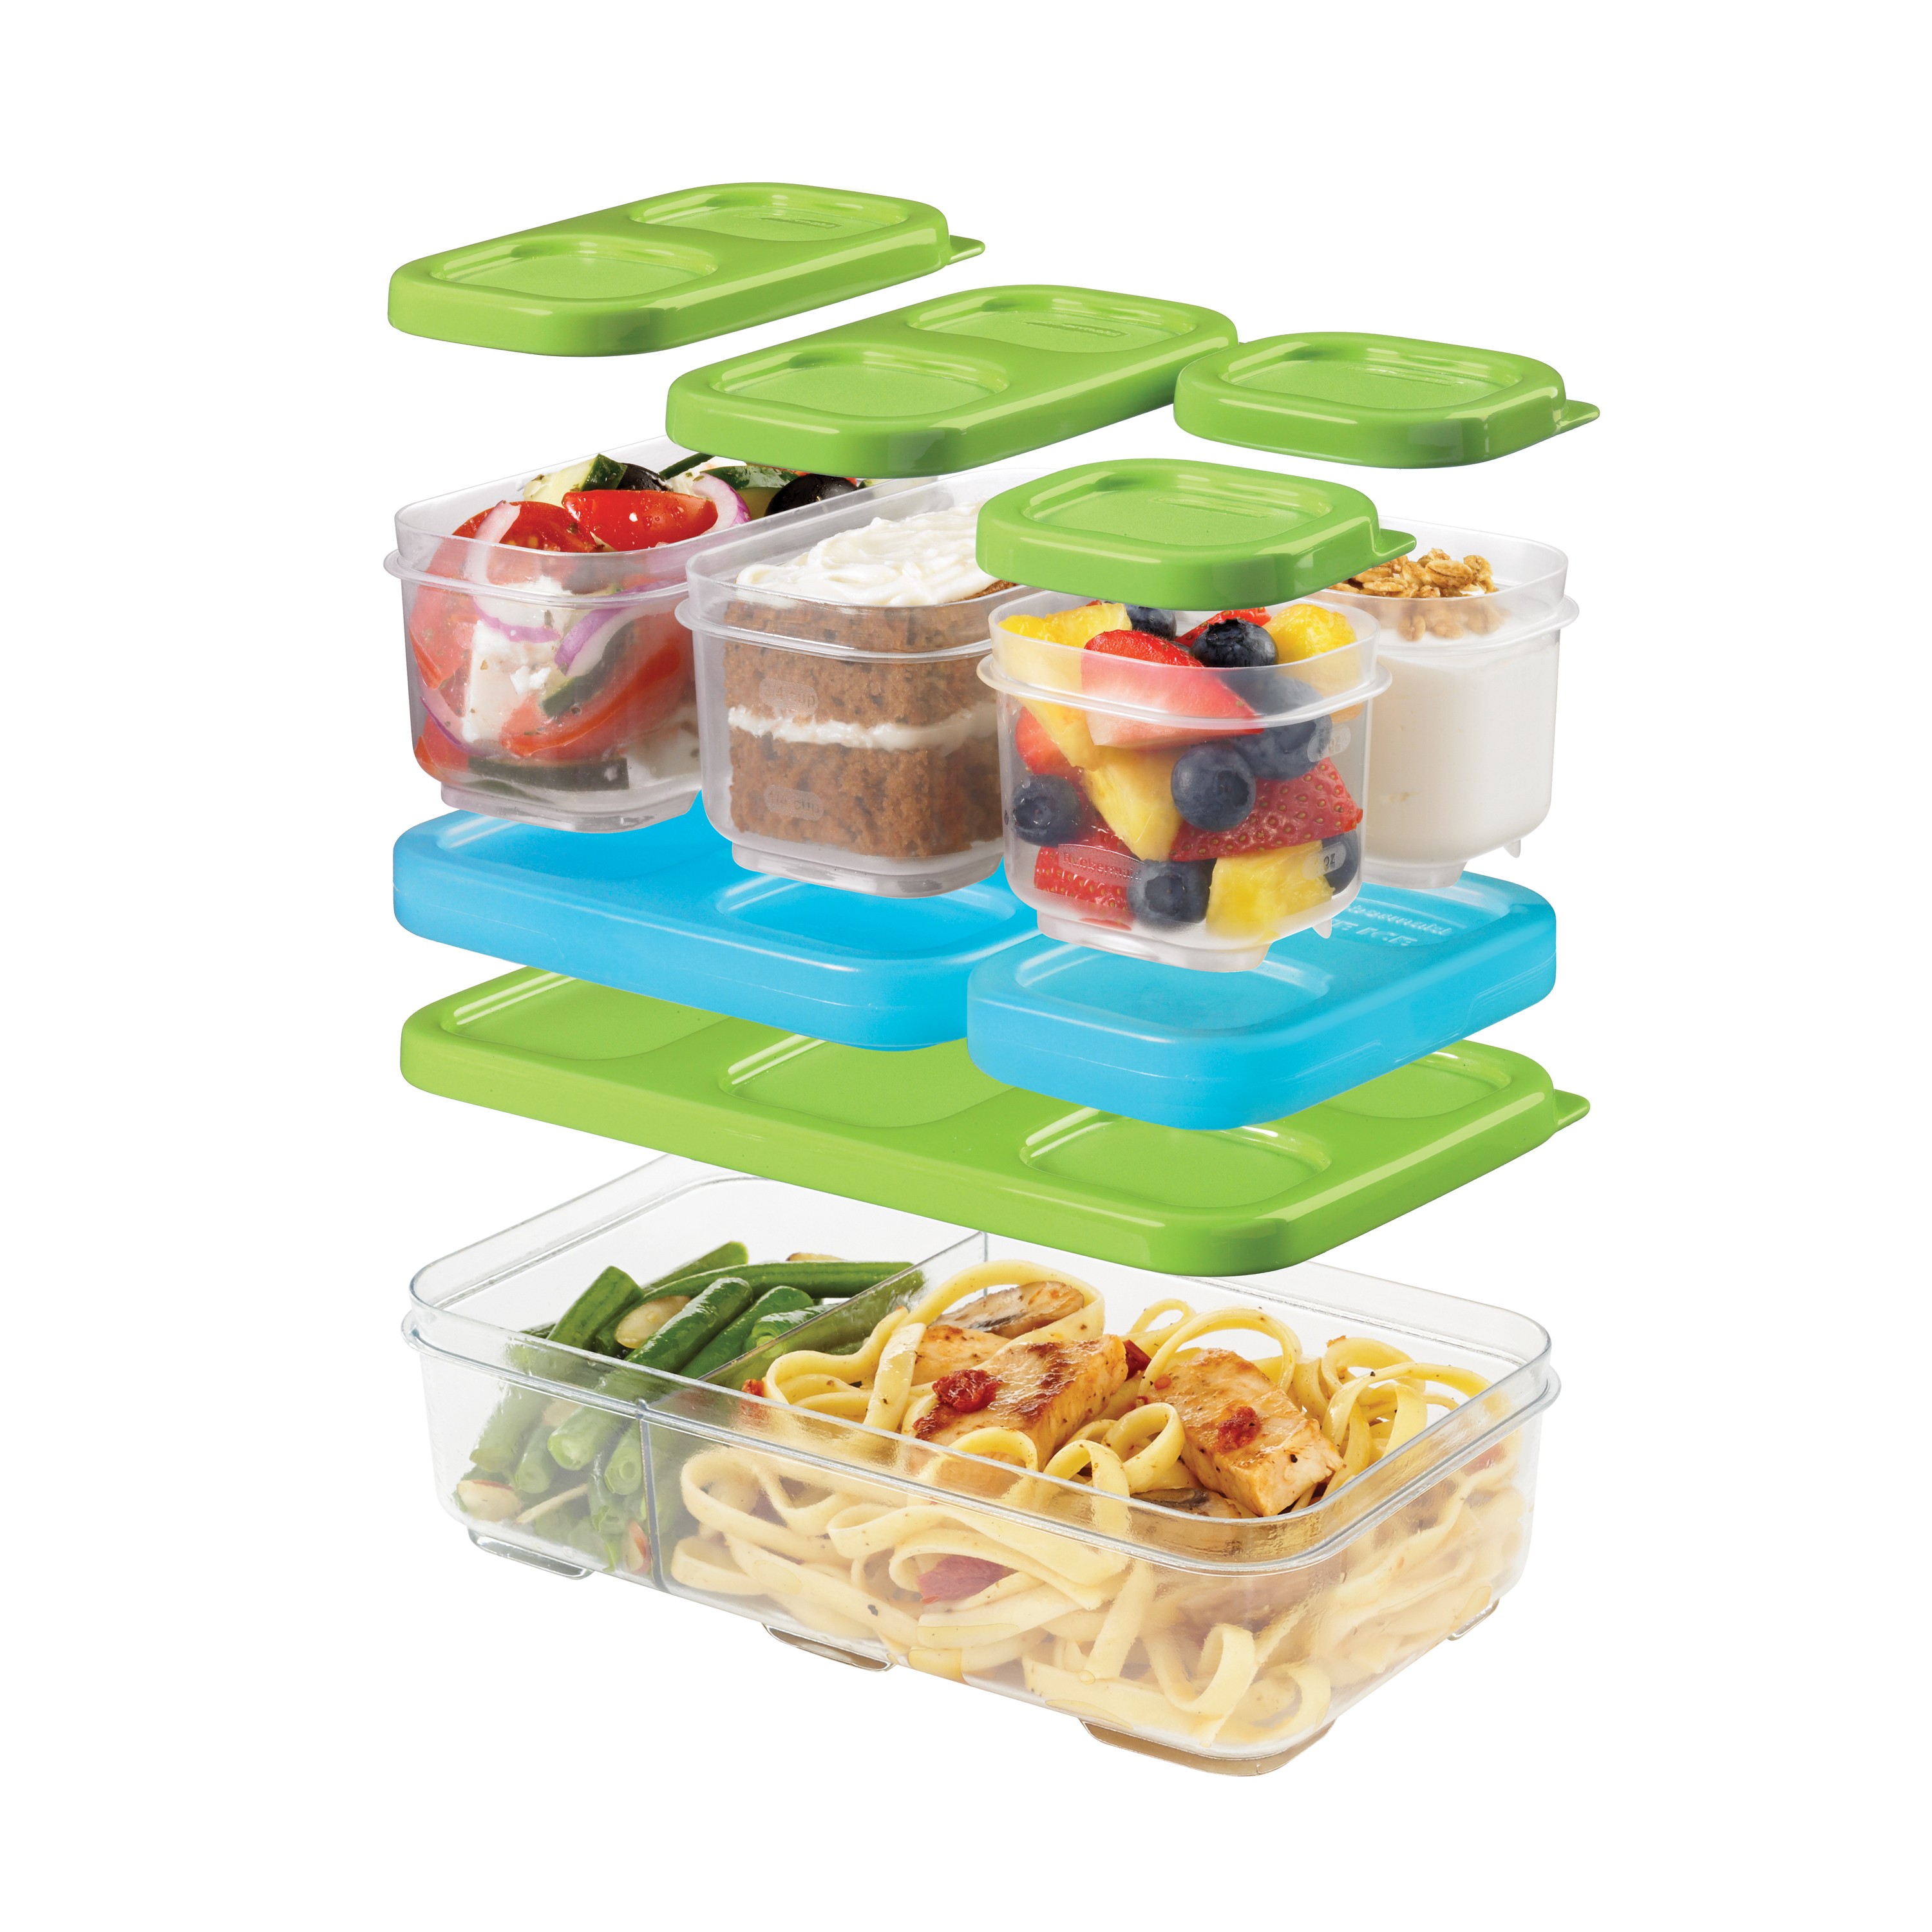 Rubbermaid LunchBlox 7-Piece Modular Entree Food Containers with Blue Ice Snap-Ins - image 3 of 4